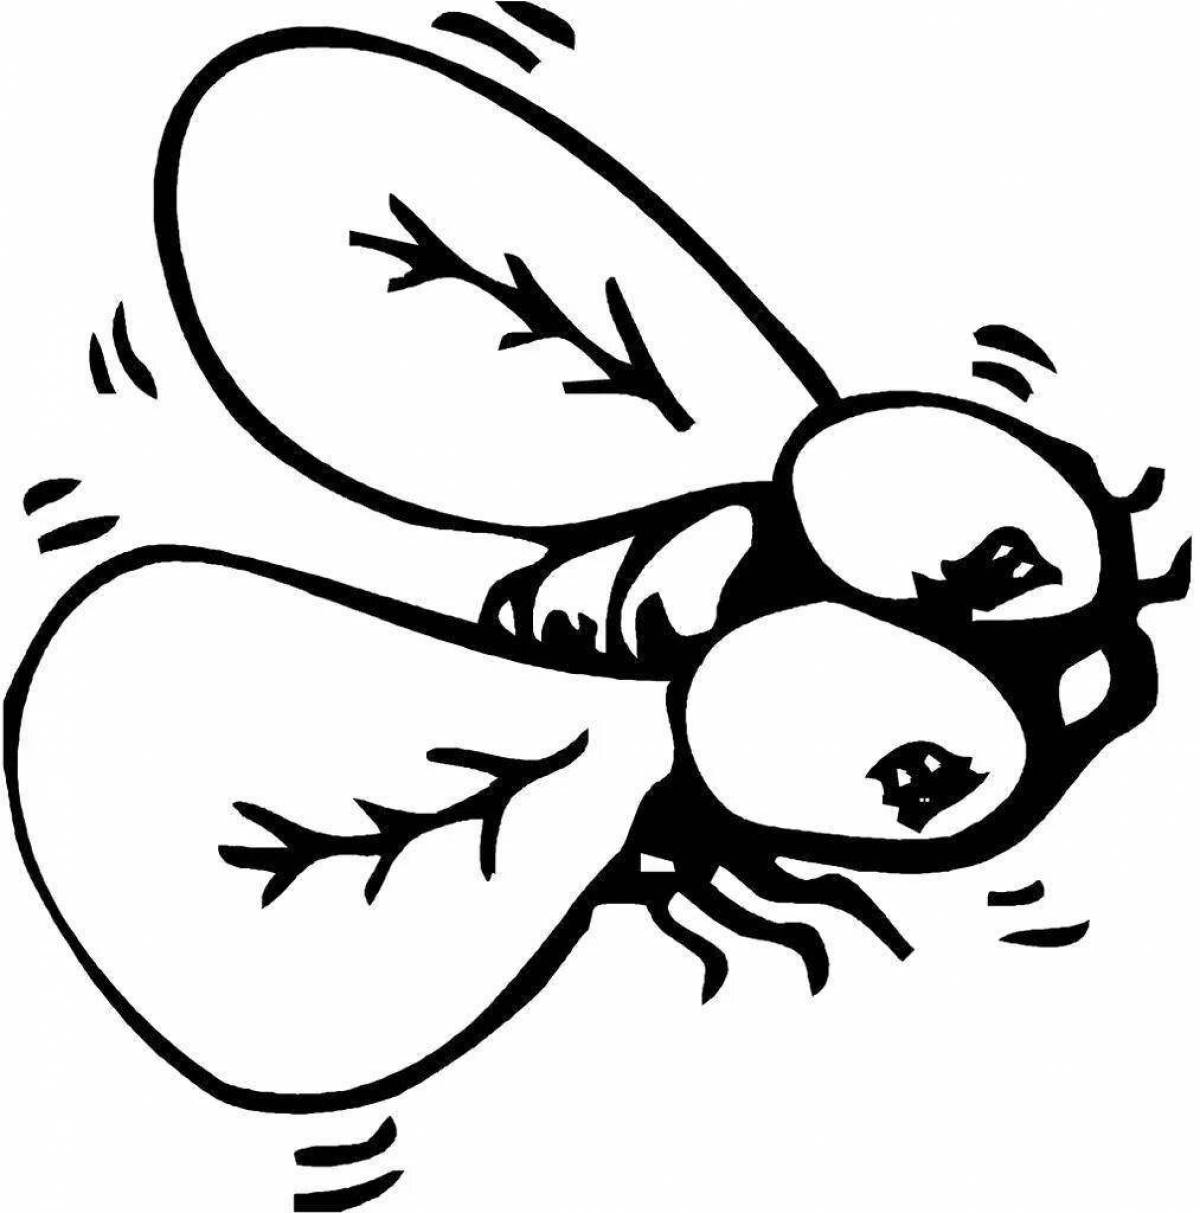 Colorful fly coloring page for kids